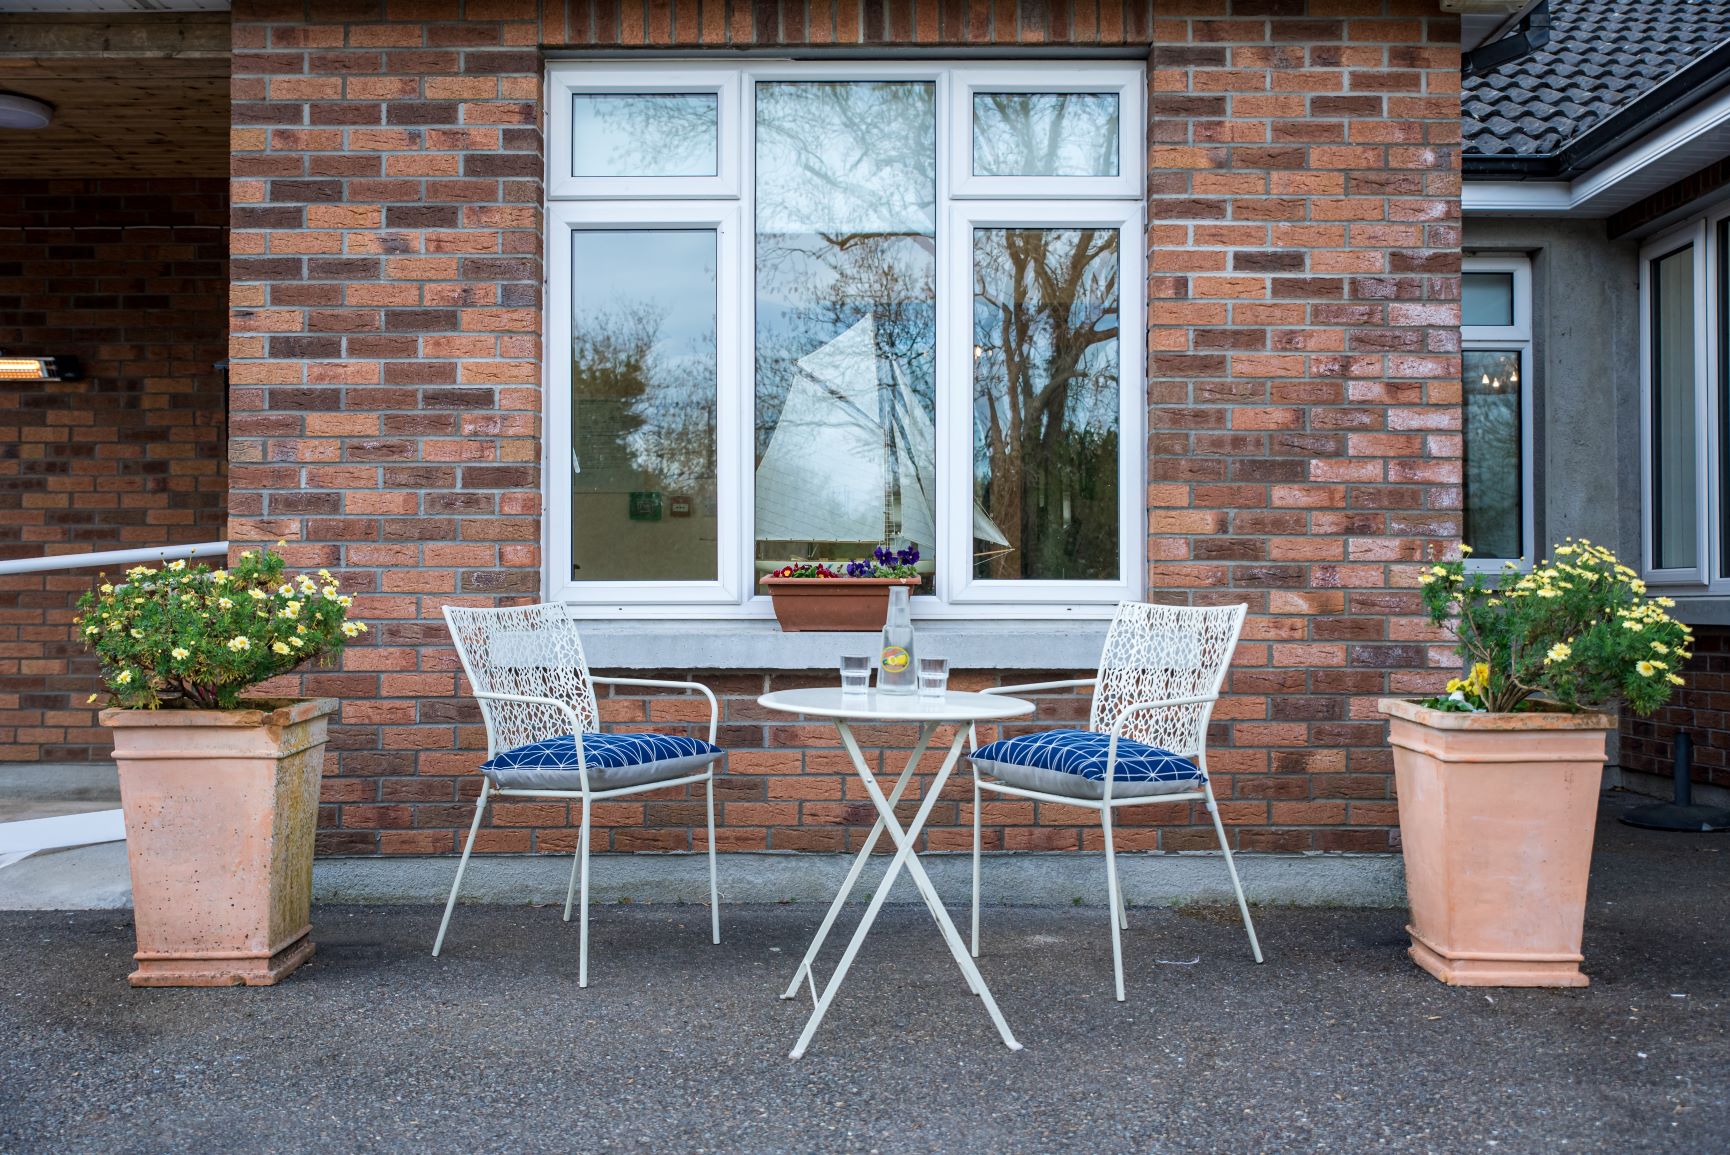 An outdoor garden table and two small chairs looking out into the front yard.